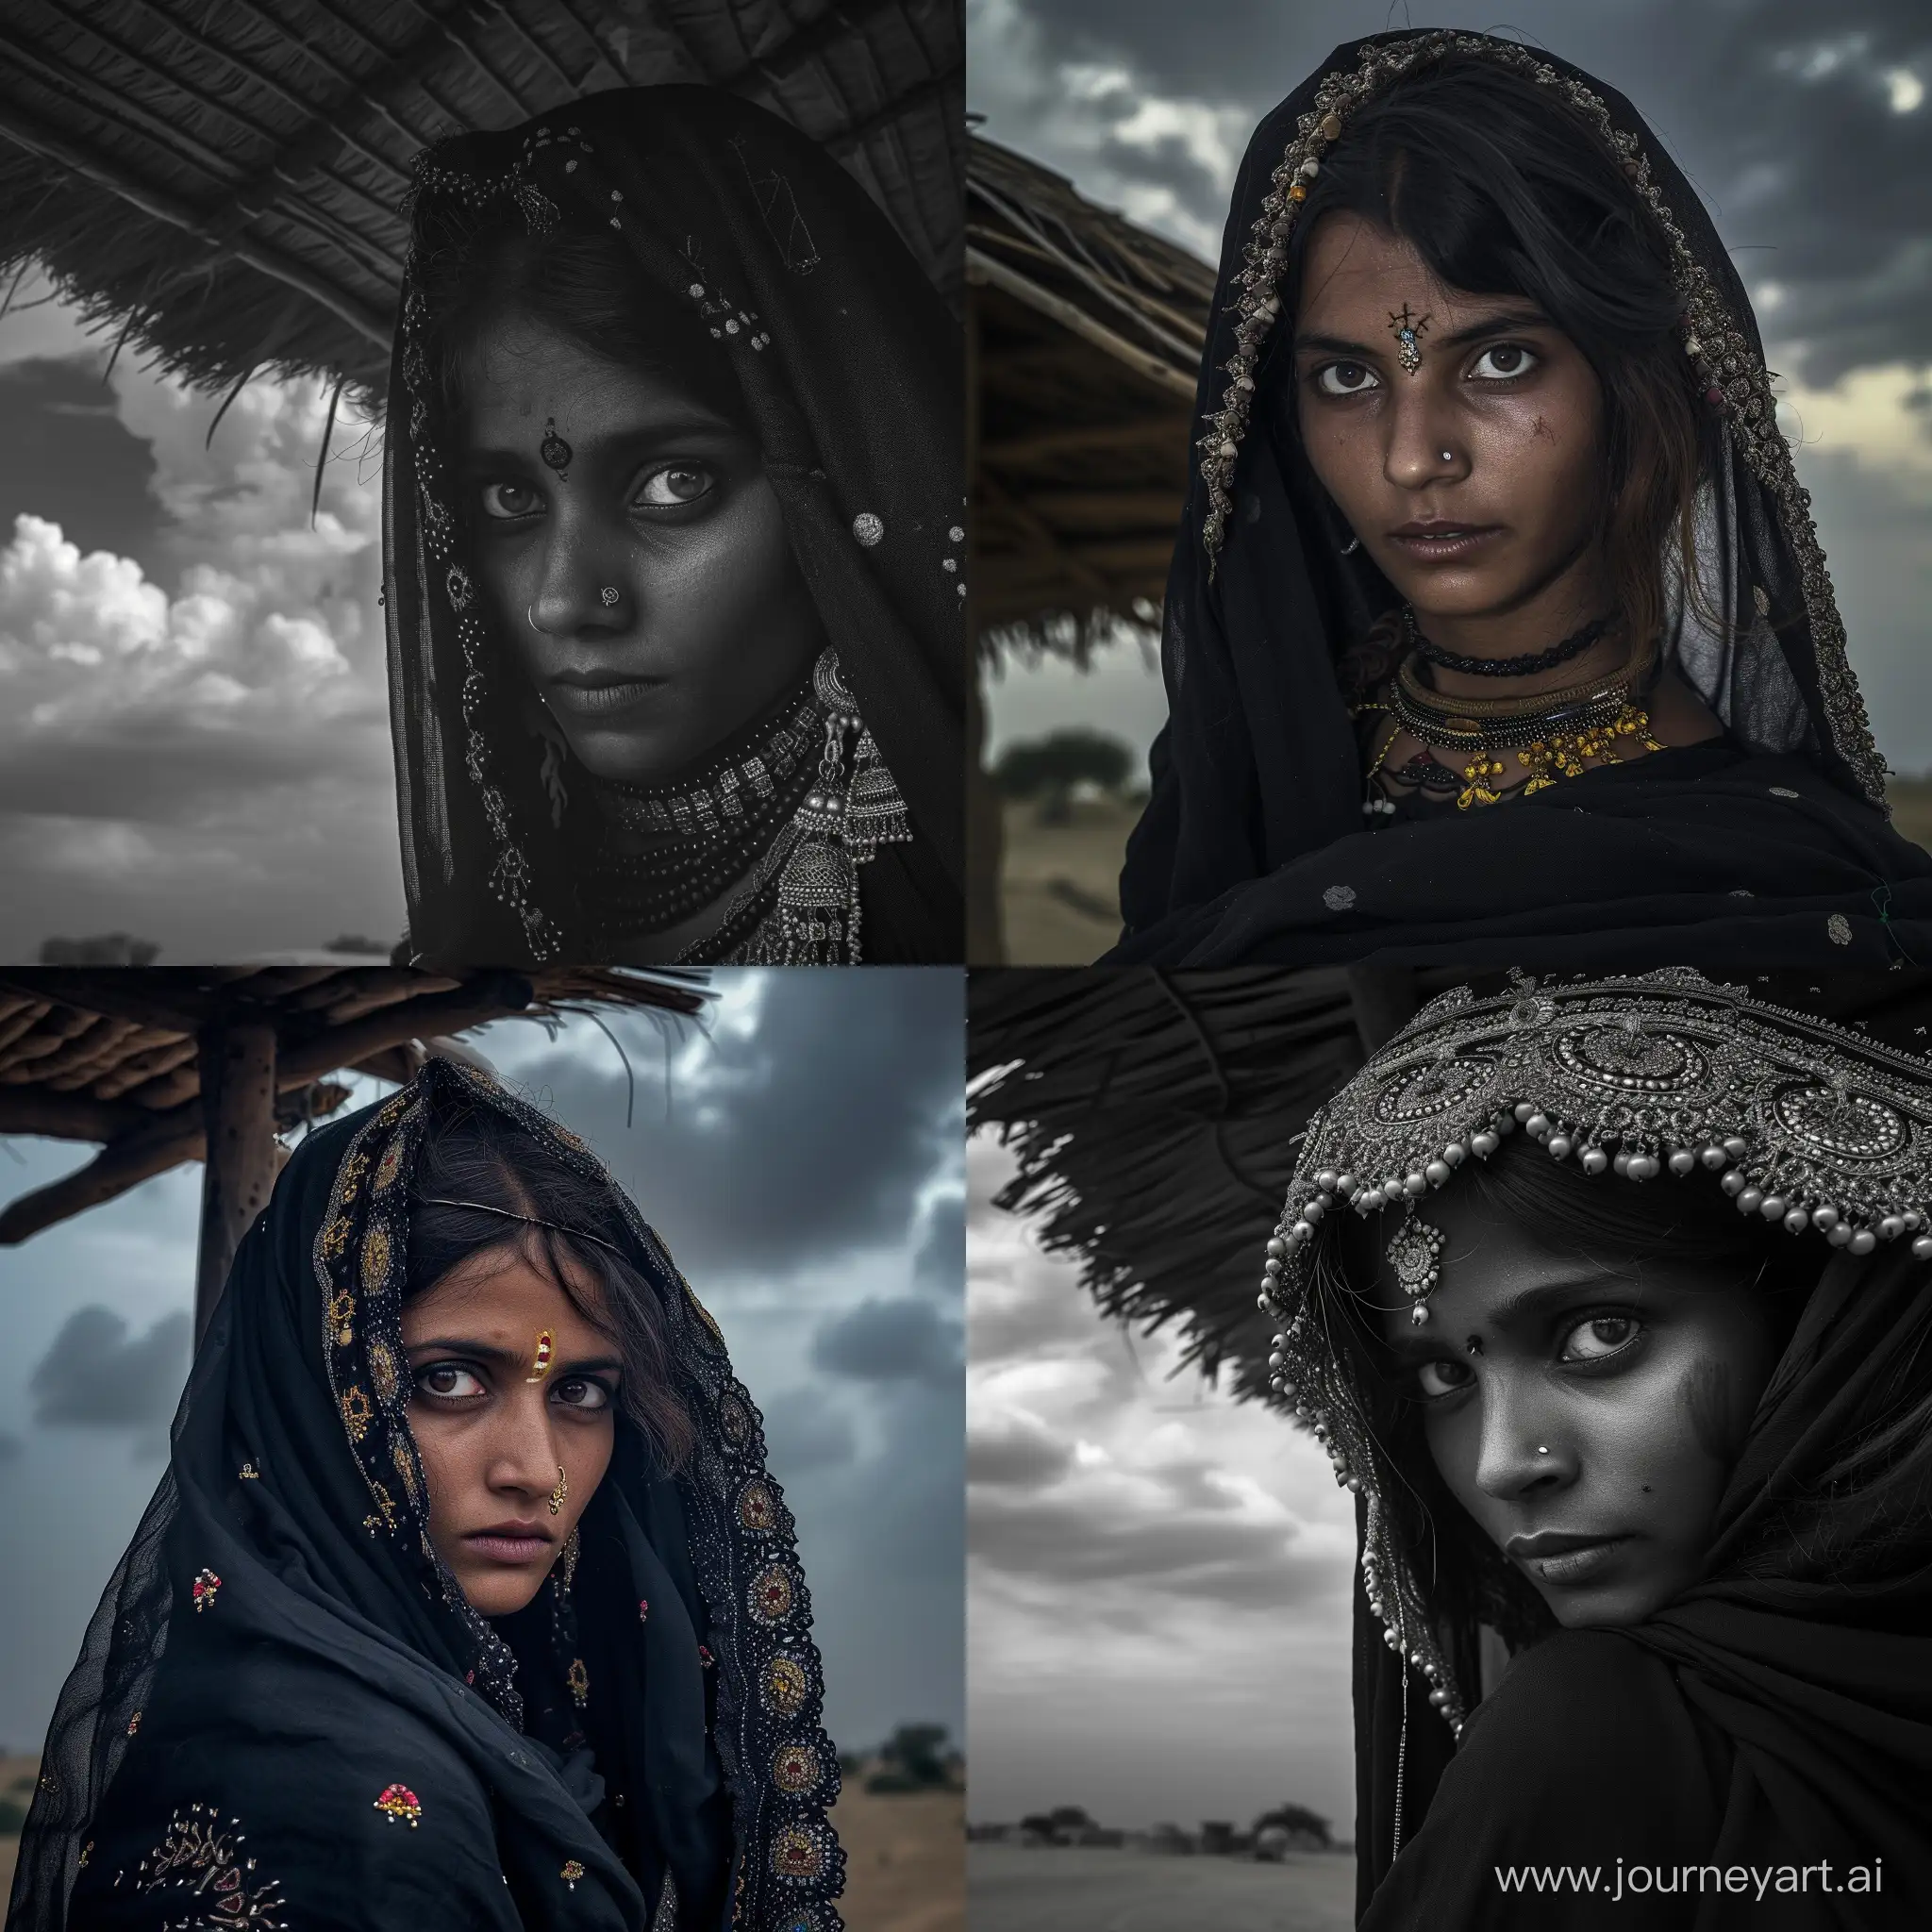 rabari women  gujarat half body  black clothing with jewerely  and beatiful eyes  with onscharp a hut soft light  and contrast cloudy sky fuji xt 5